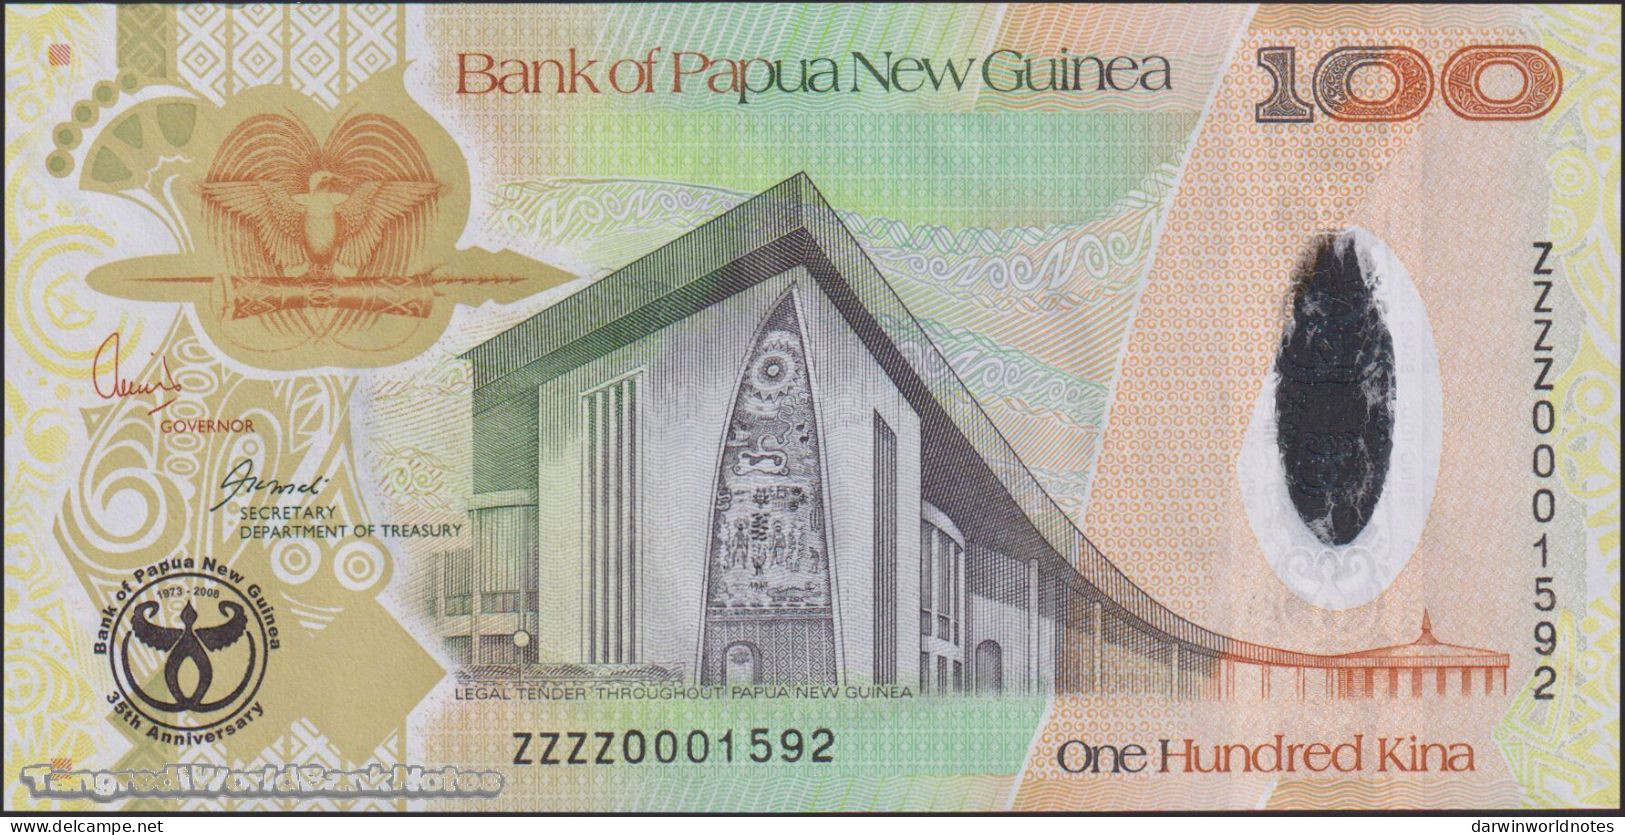 DWN - 325 world UNC different banknotes - FREE PAPUA NEW GUINEA 100 Kina 2008 (P.37) REPLACEMENT ZZZZ